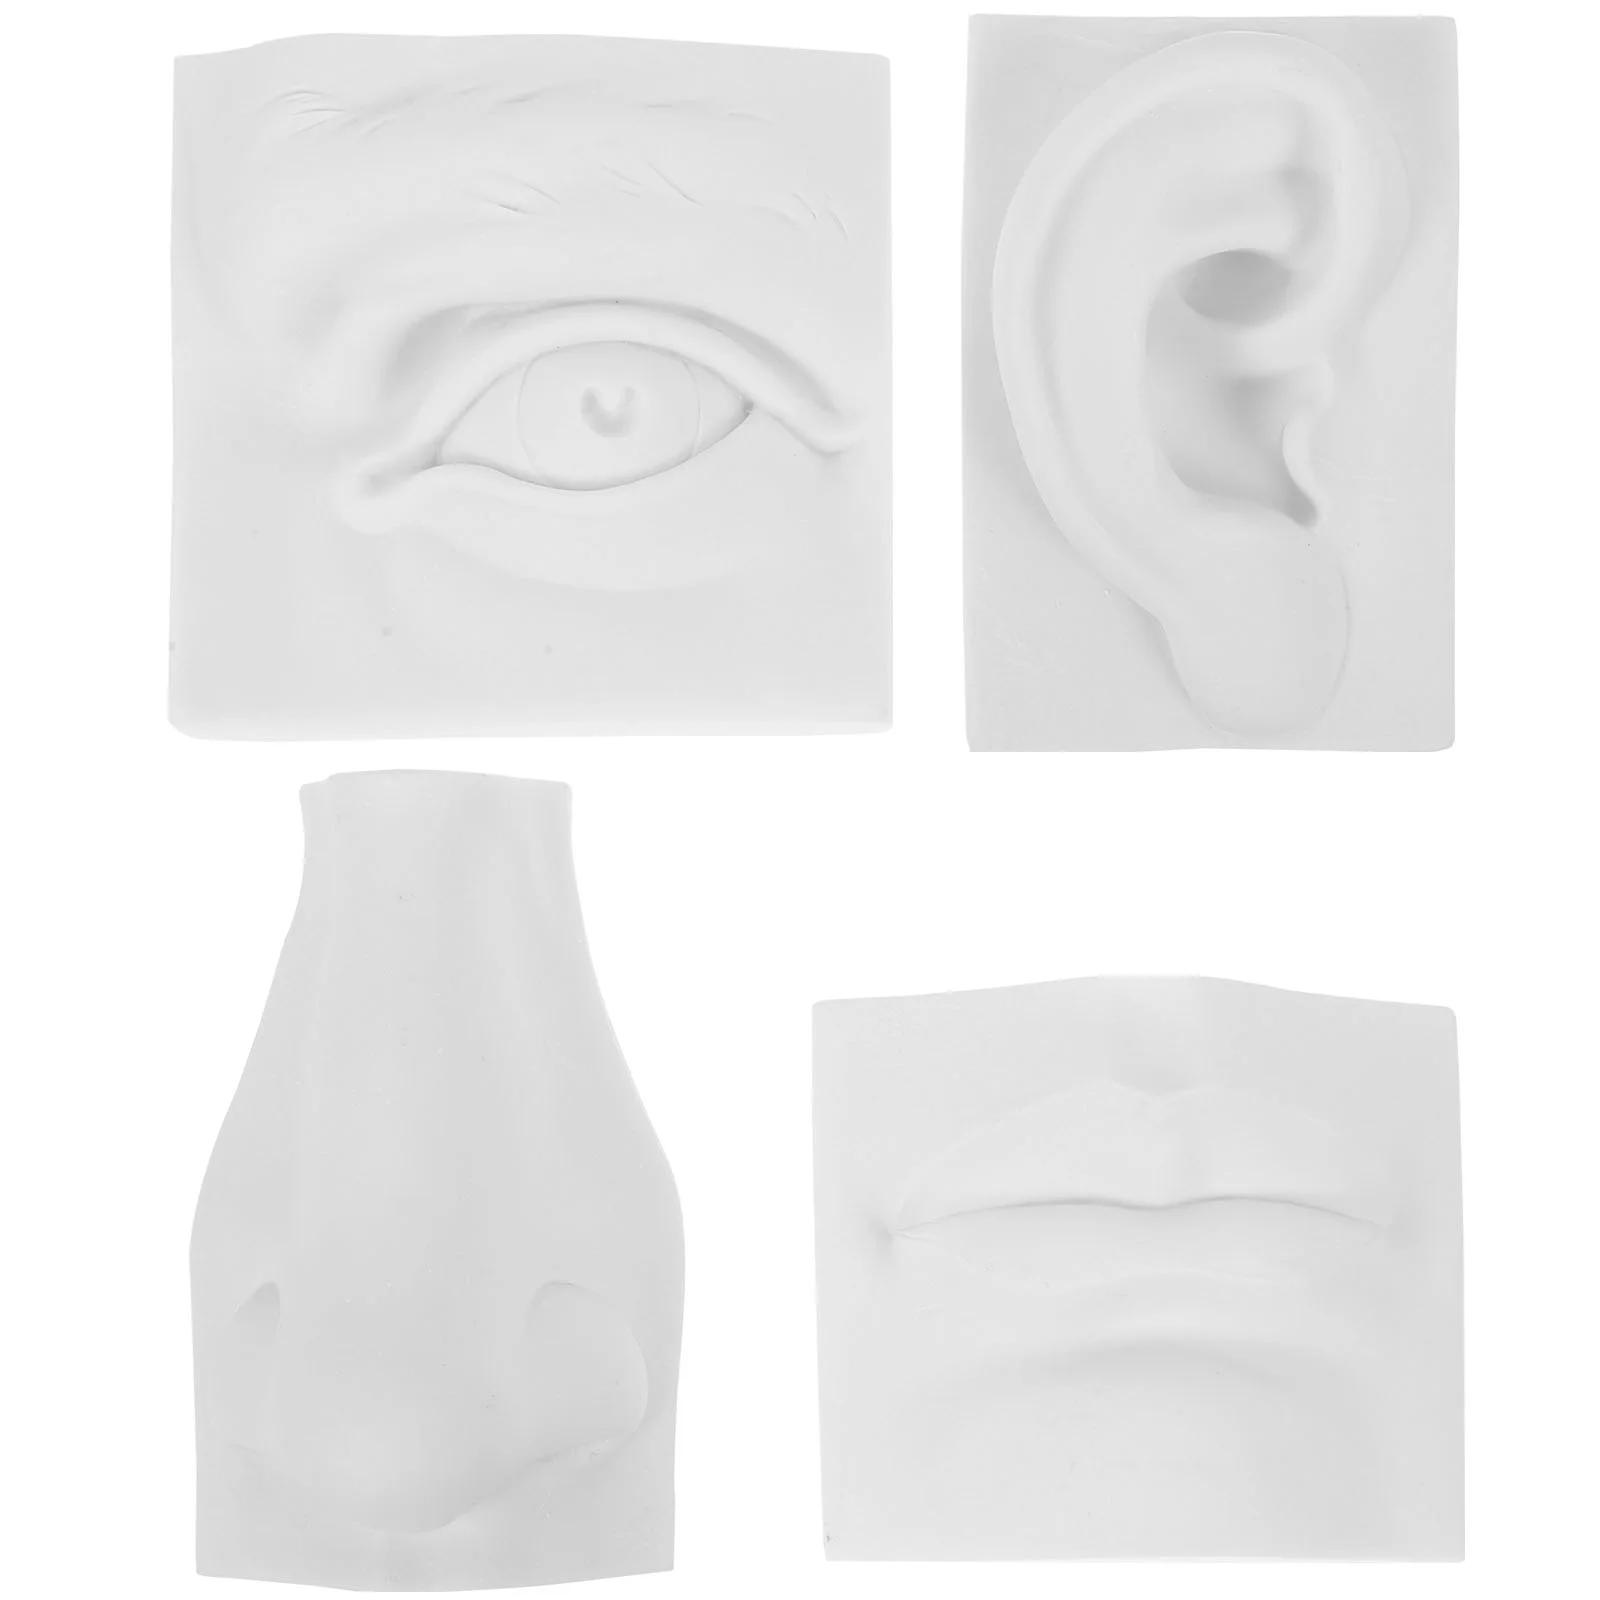 

Plaster Statue of Facial Features Sketch Practice Tool Resin Mold Drawing Model Molds Sculpture Teaching Aid Ornament